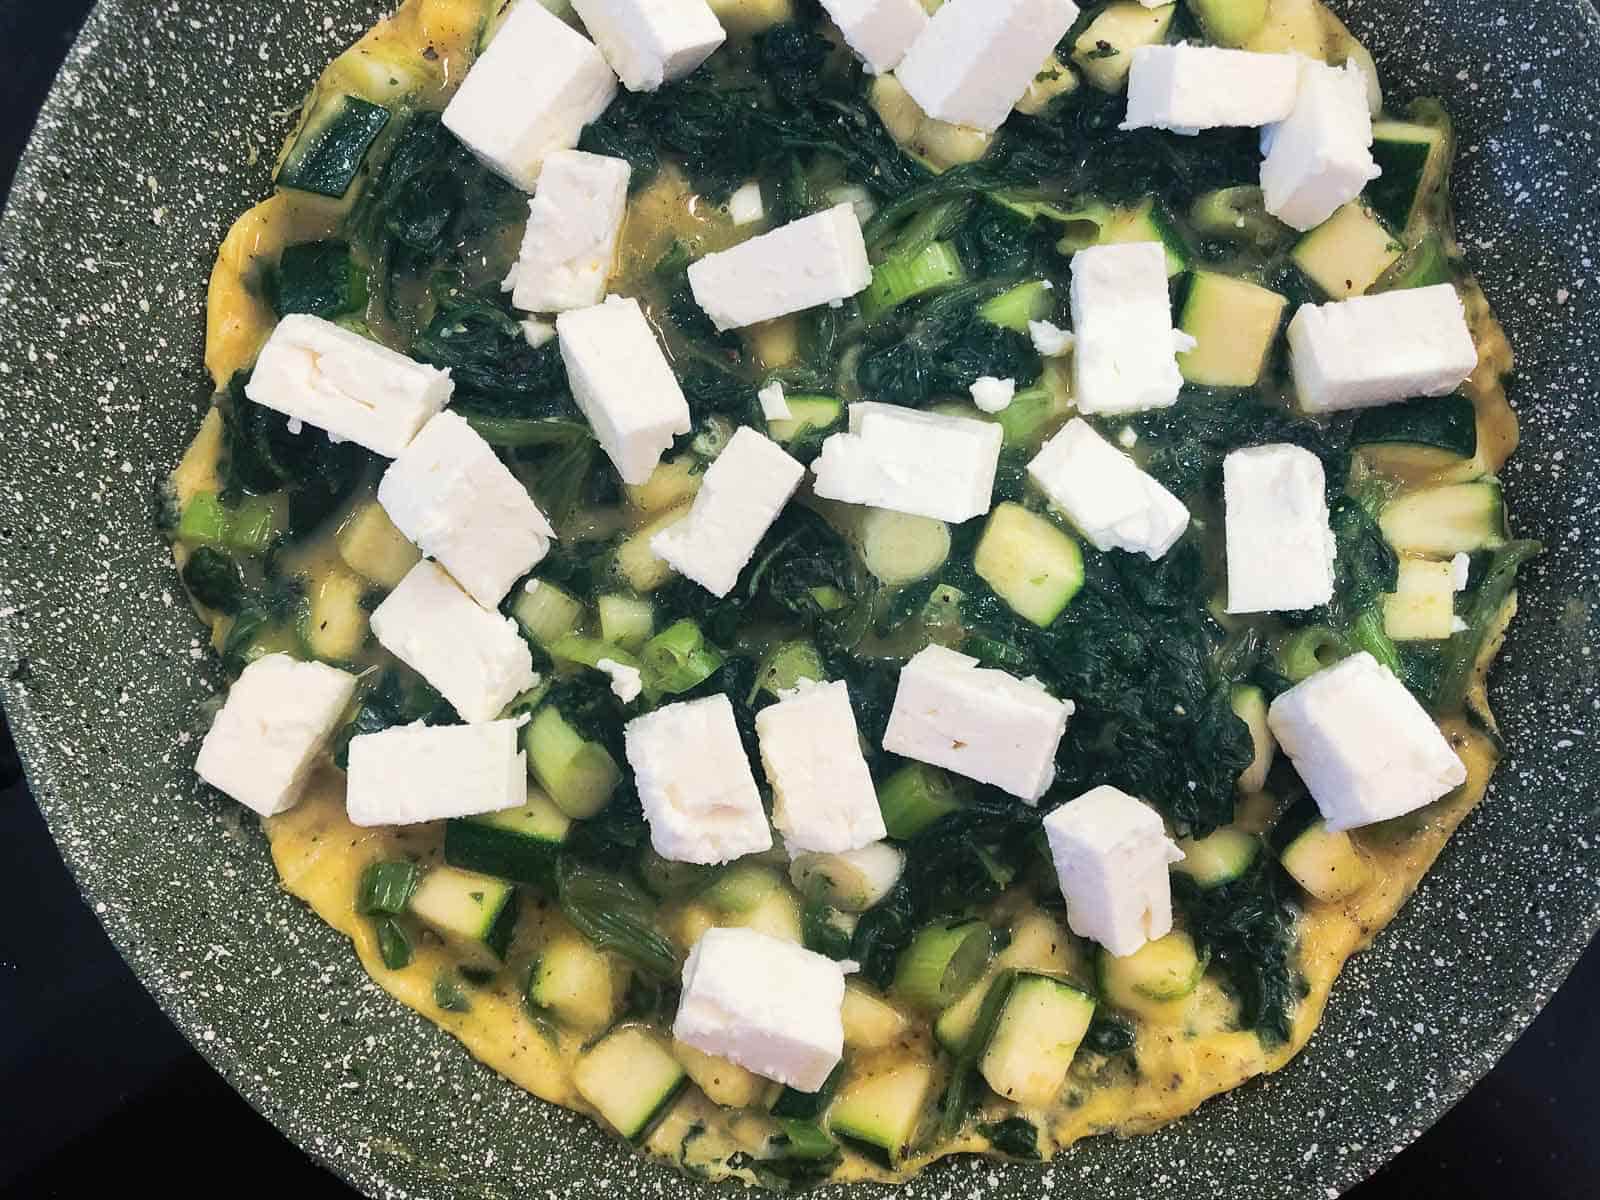 An omelette filled with green vegetables and topped with feta cheese ready to pop under the grill.